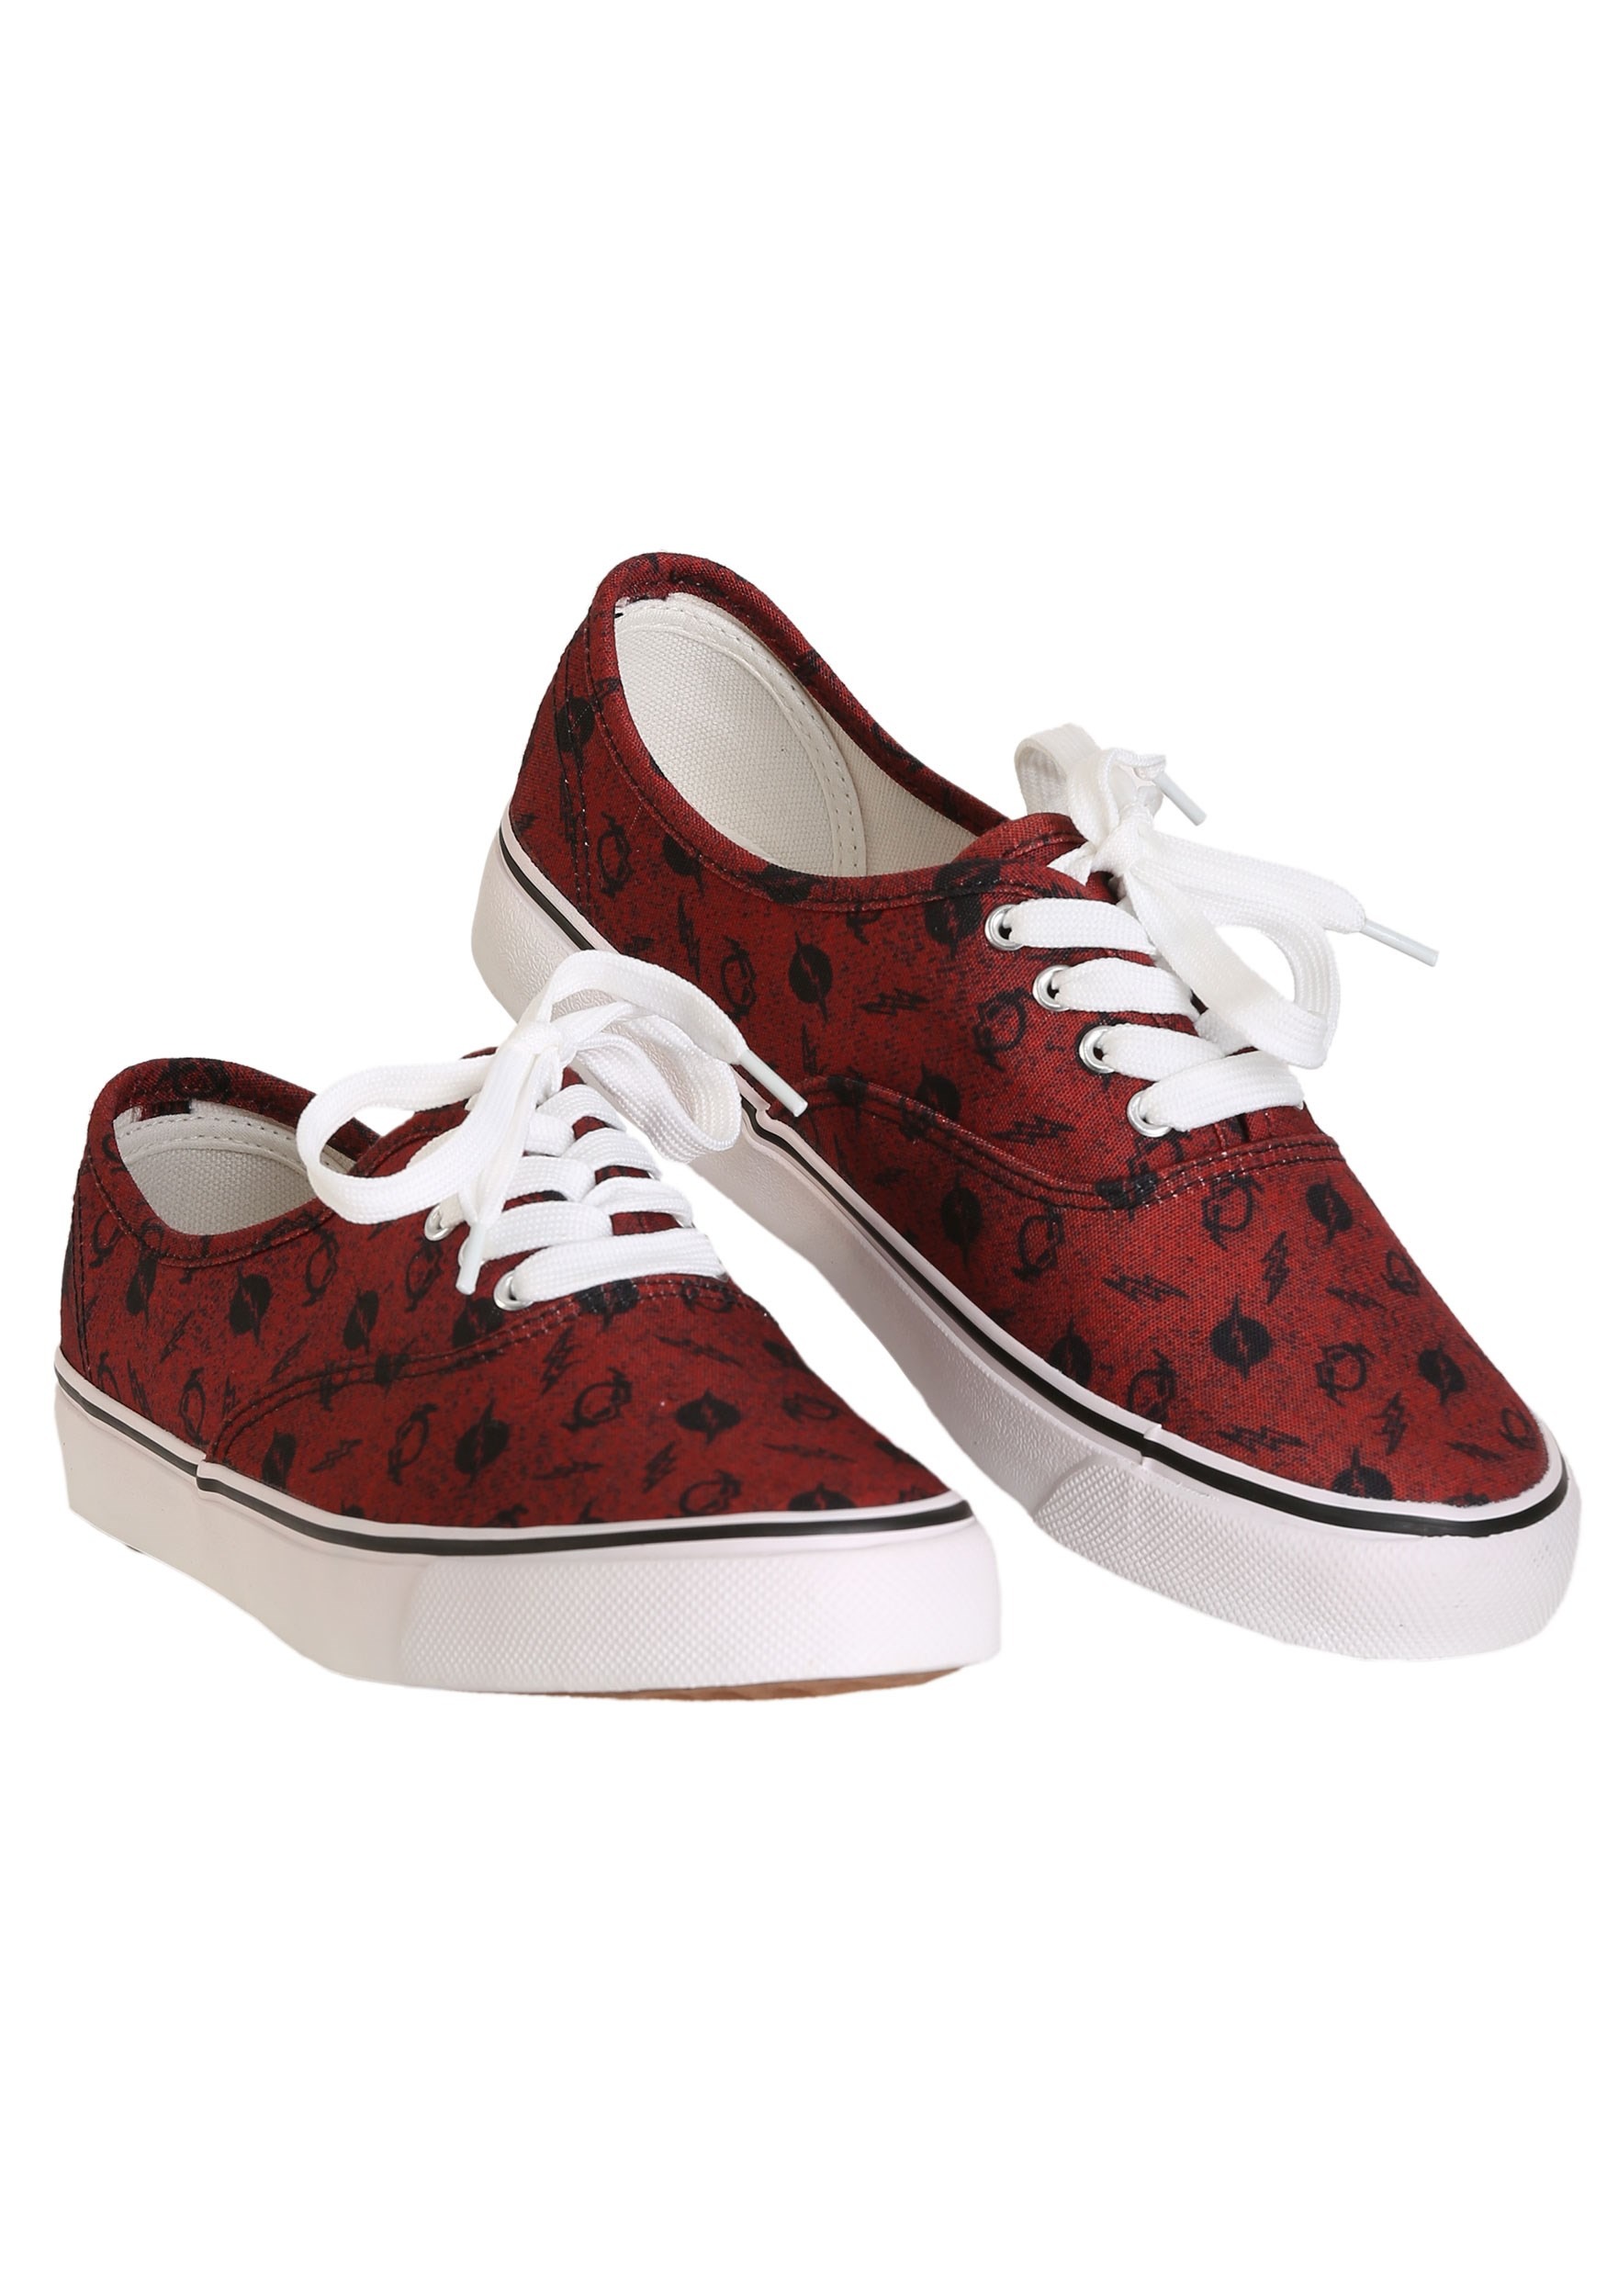 red canvas shoes womens